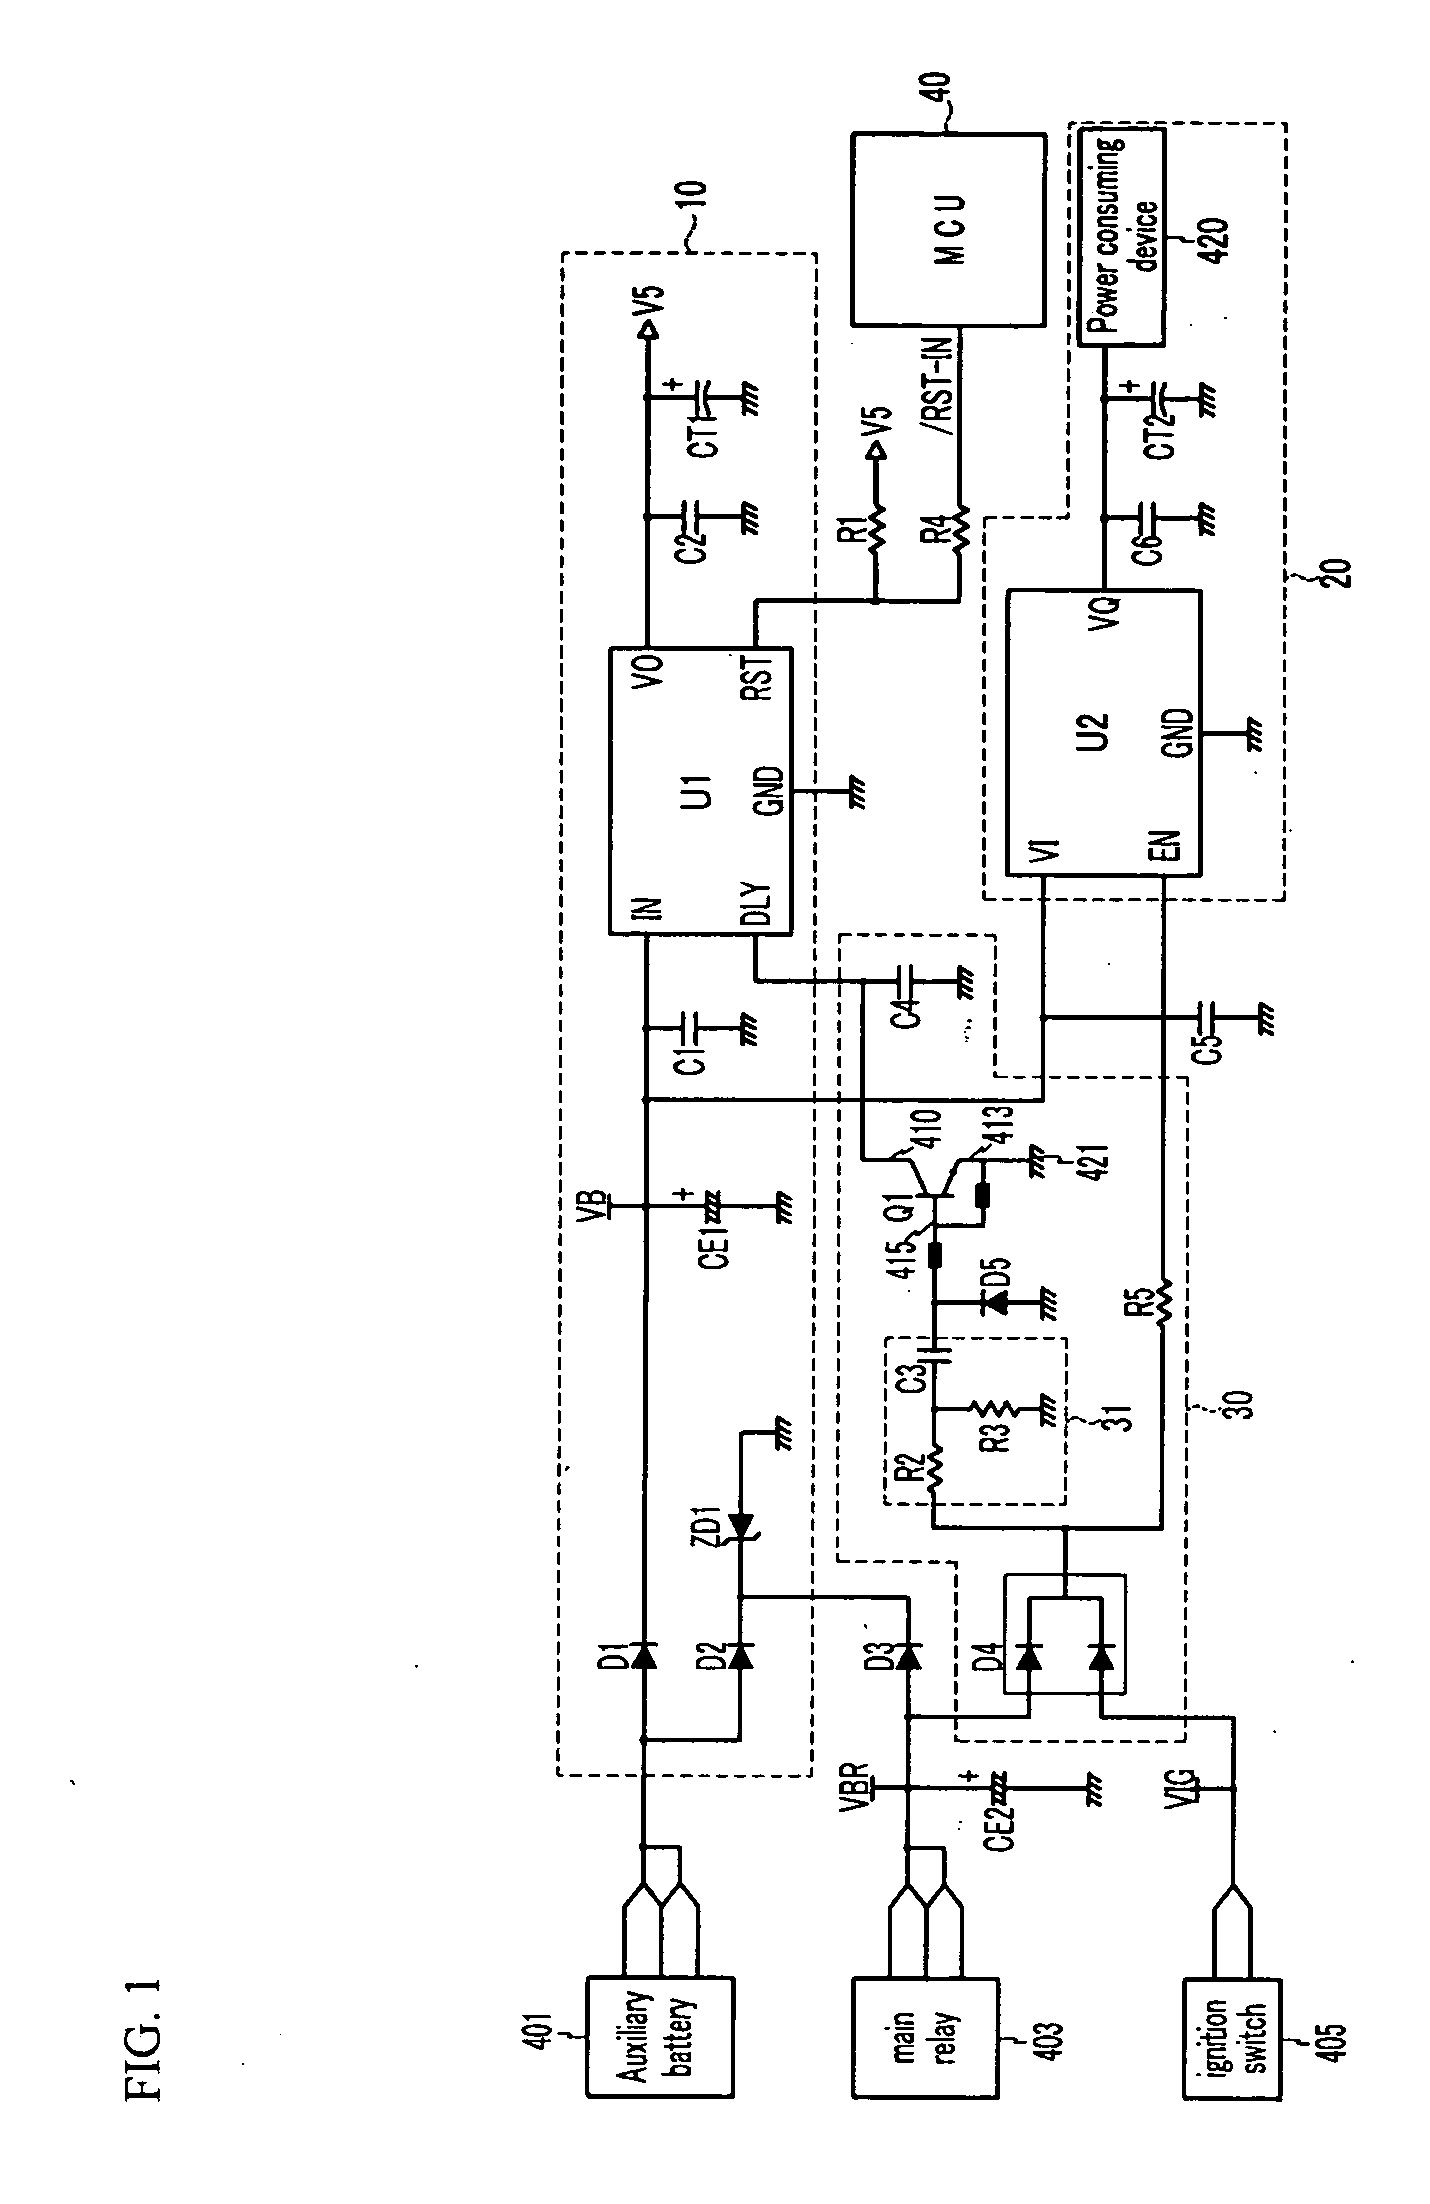 Apparatus for controlling electric power for electric vehicle